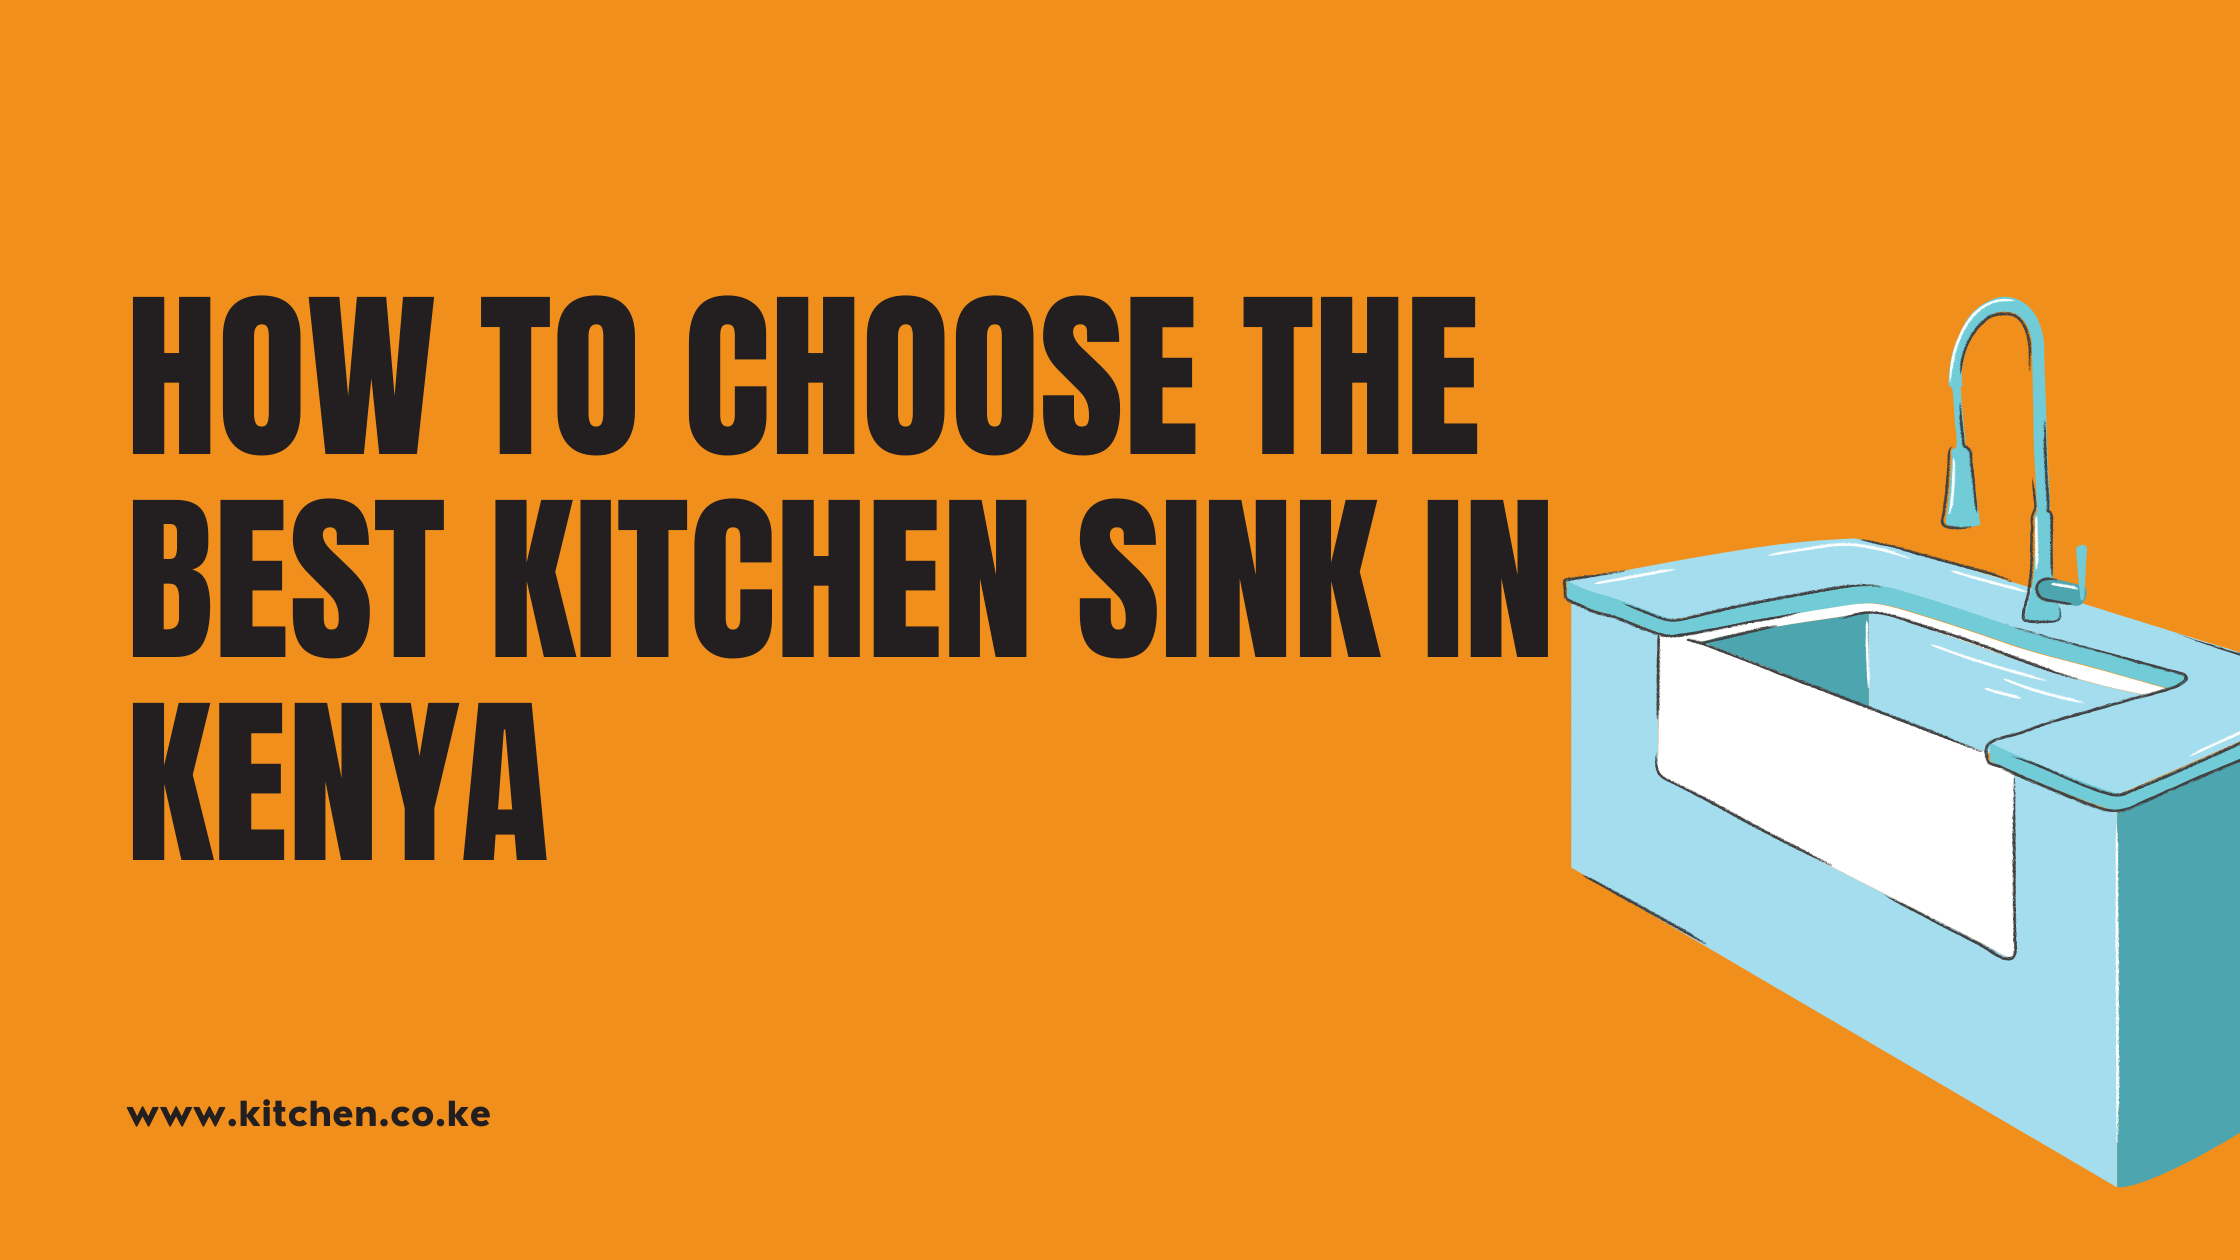 How To Choose The Best Kitchen Sink in Kenya [9 Types]